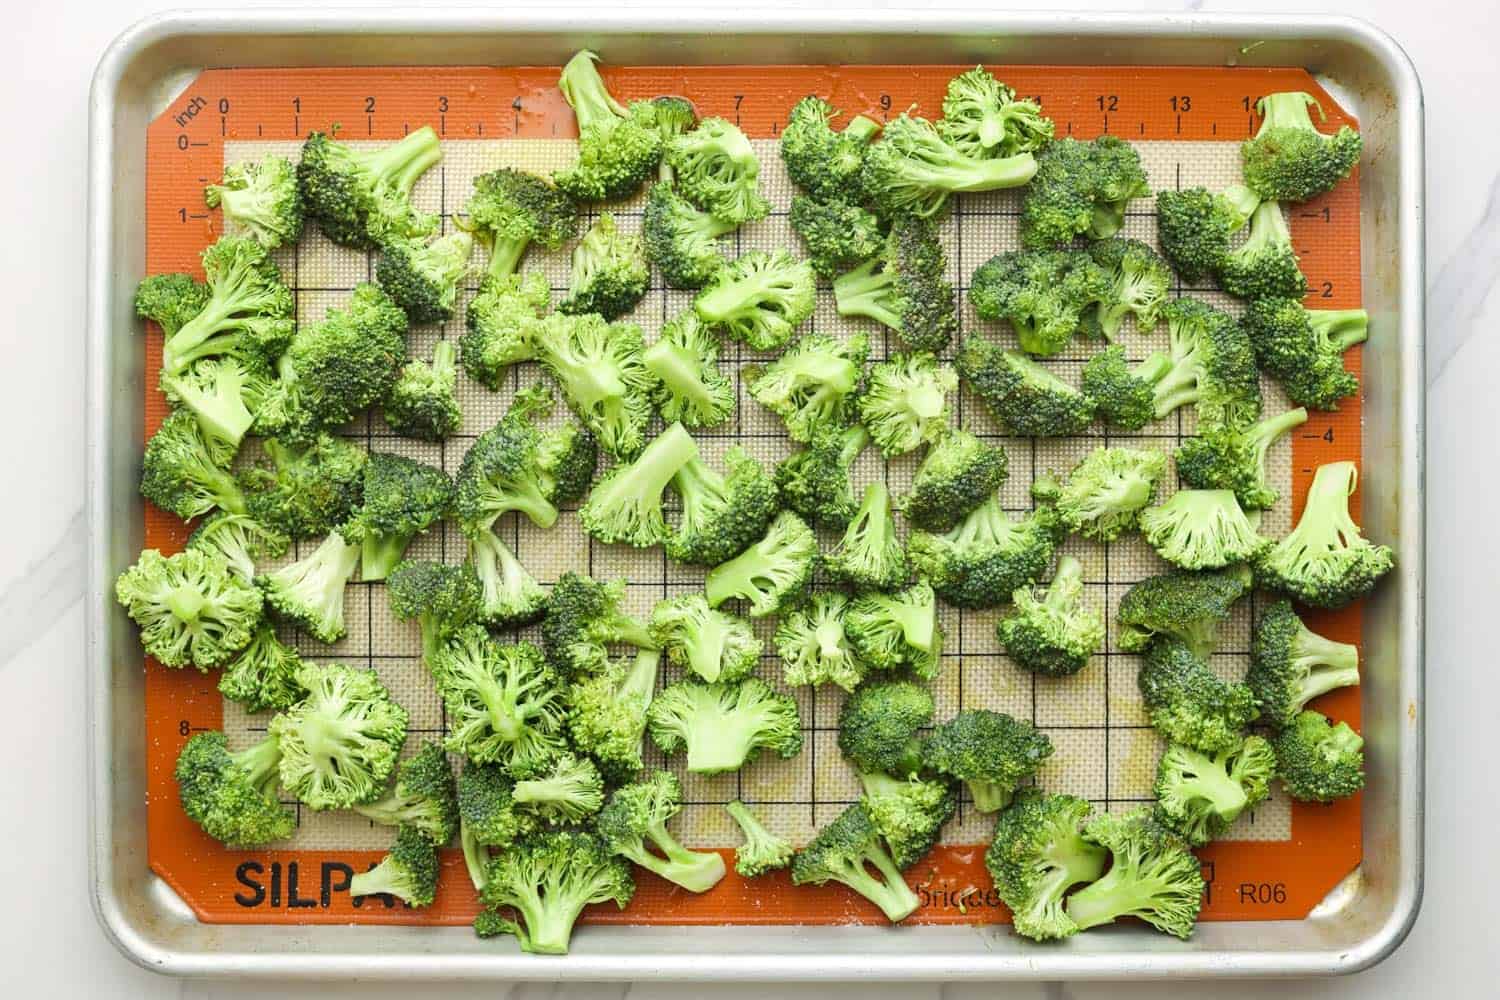 Broccoli florets with olive oil on a sheet pan lined with a silicone mat